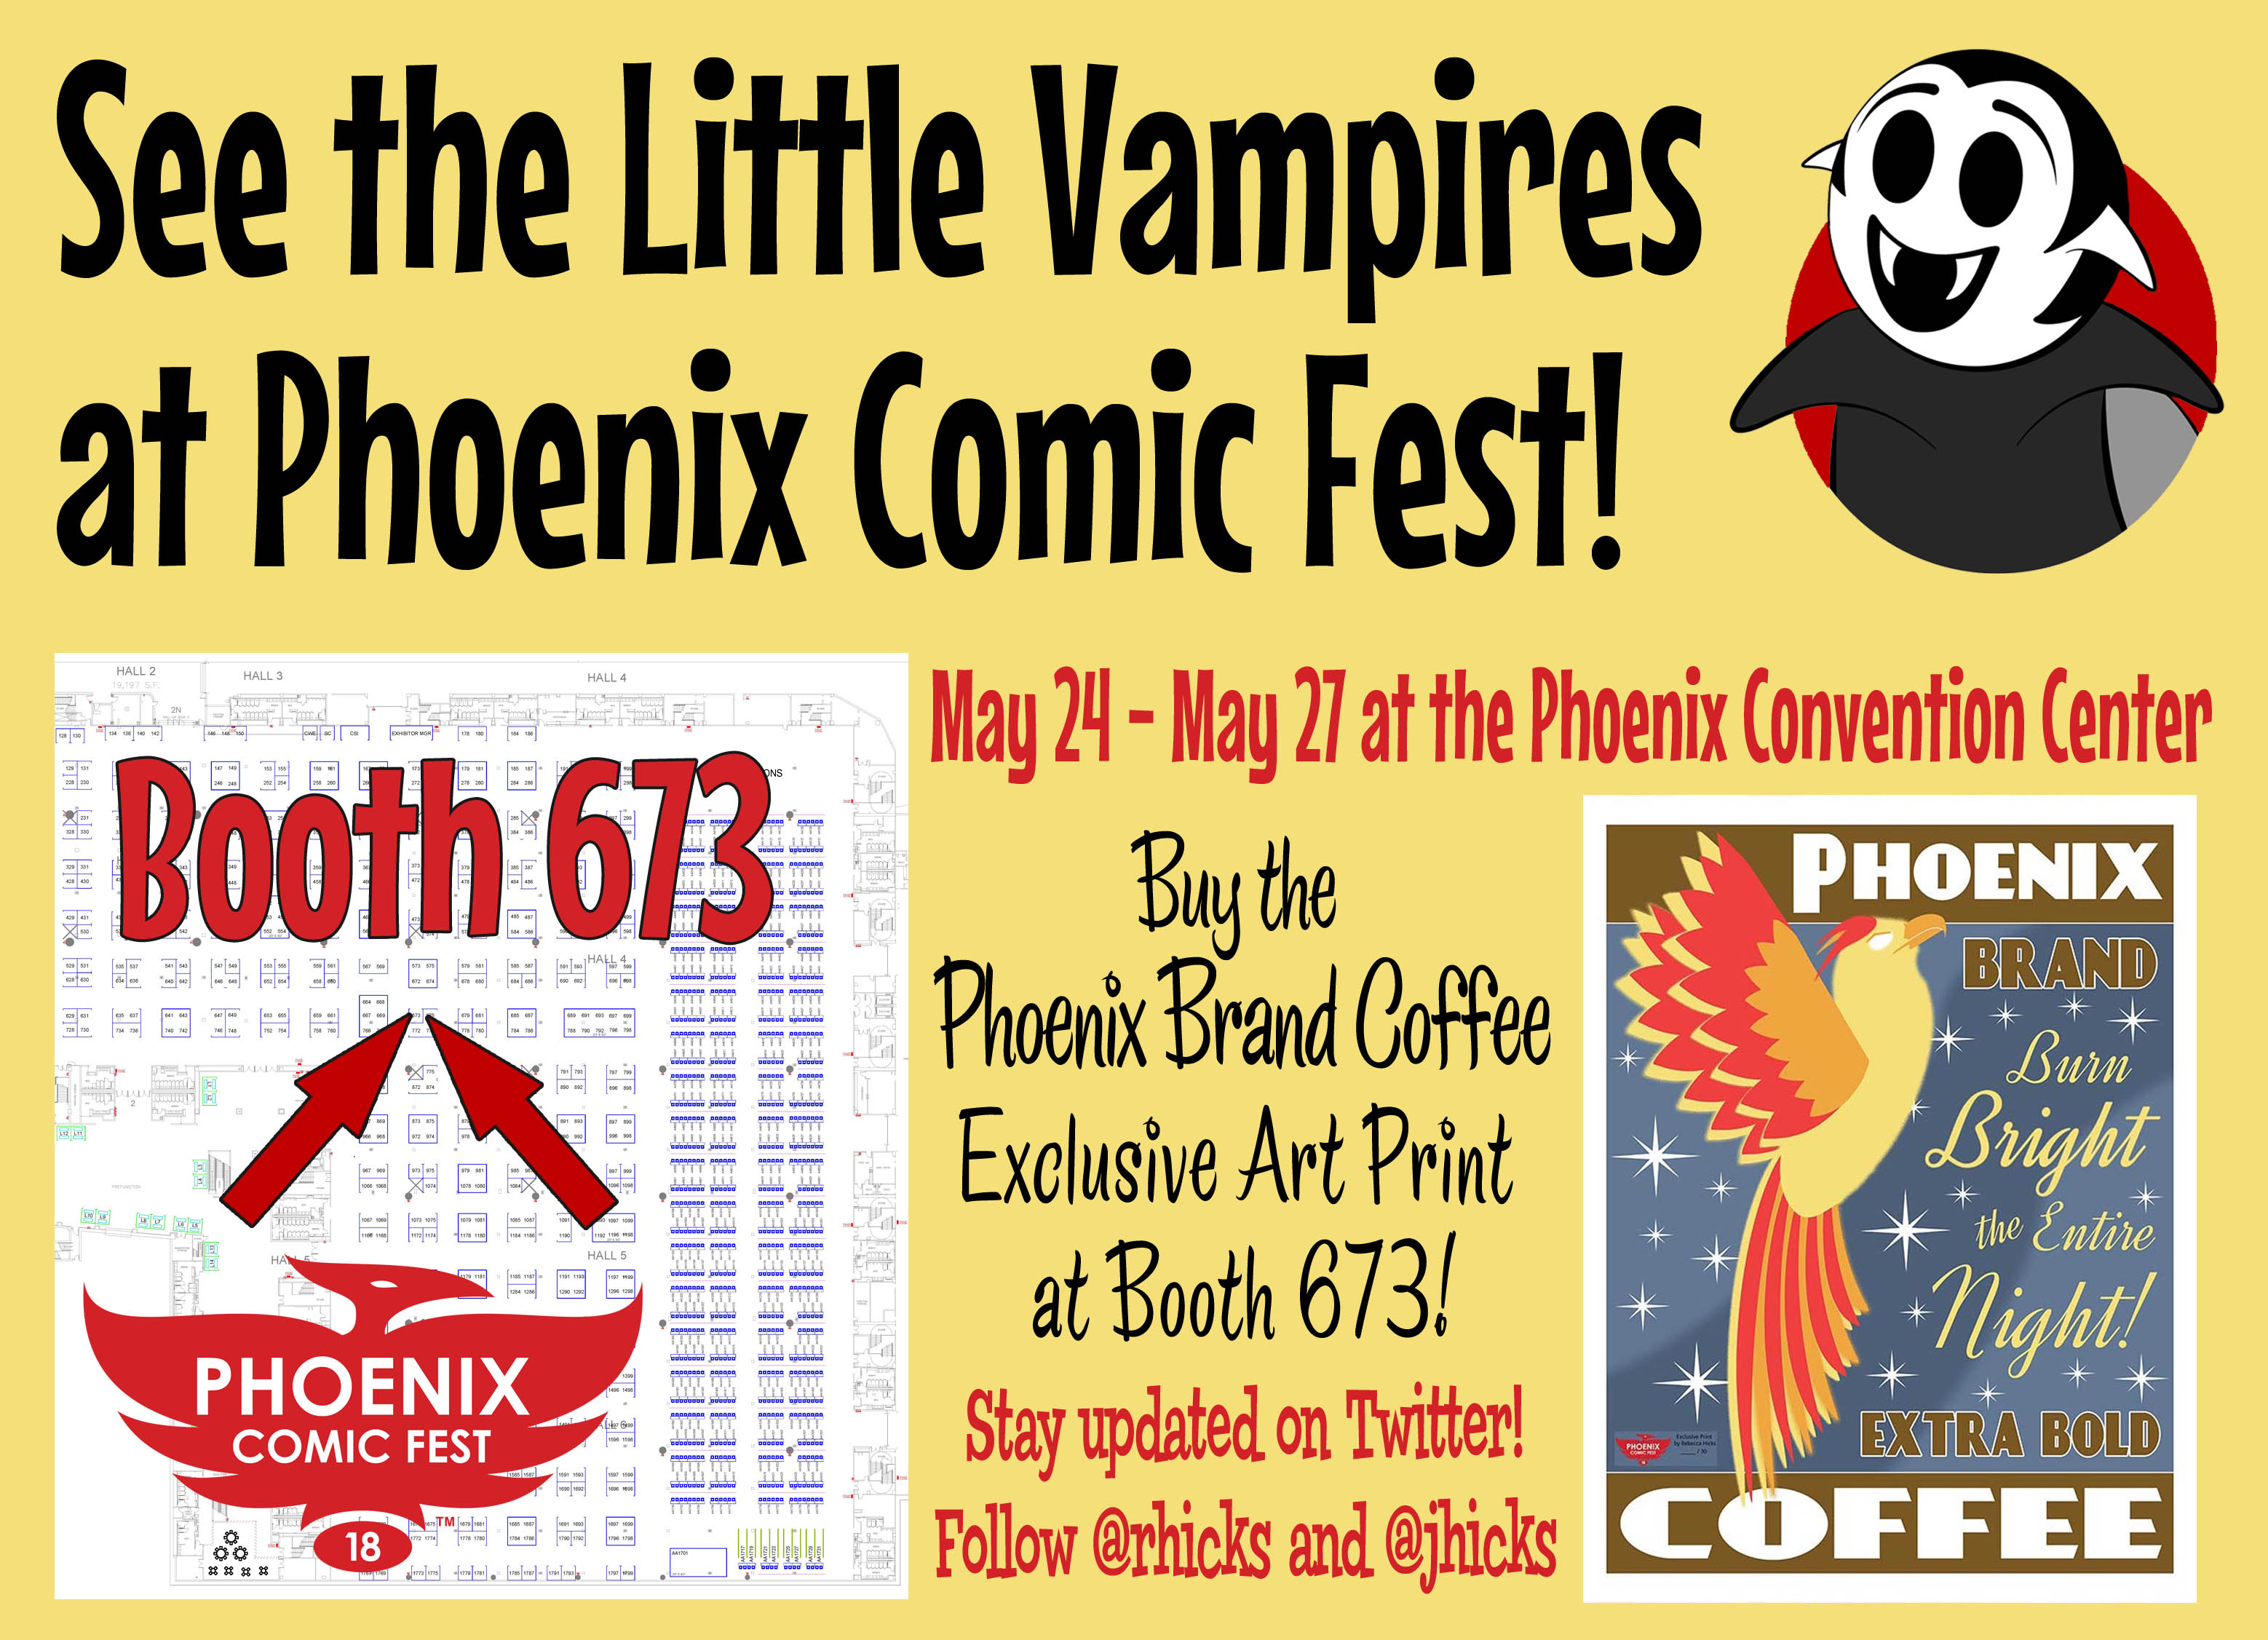 Phoenix Comic Fest 2018 exhibitor floor map with the Little Vampires booth highlighted